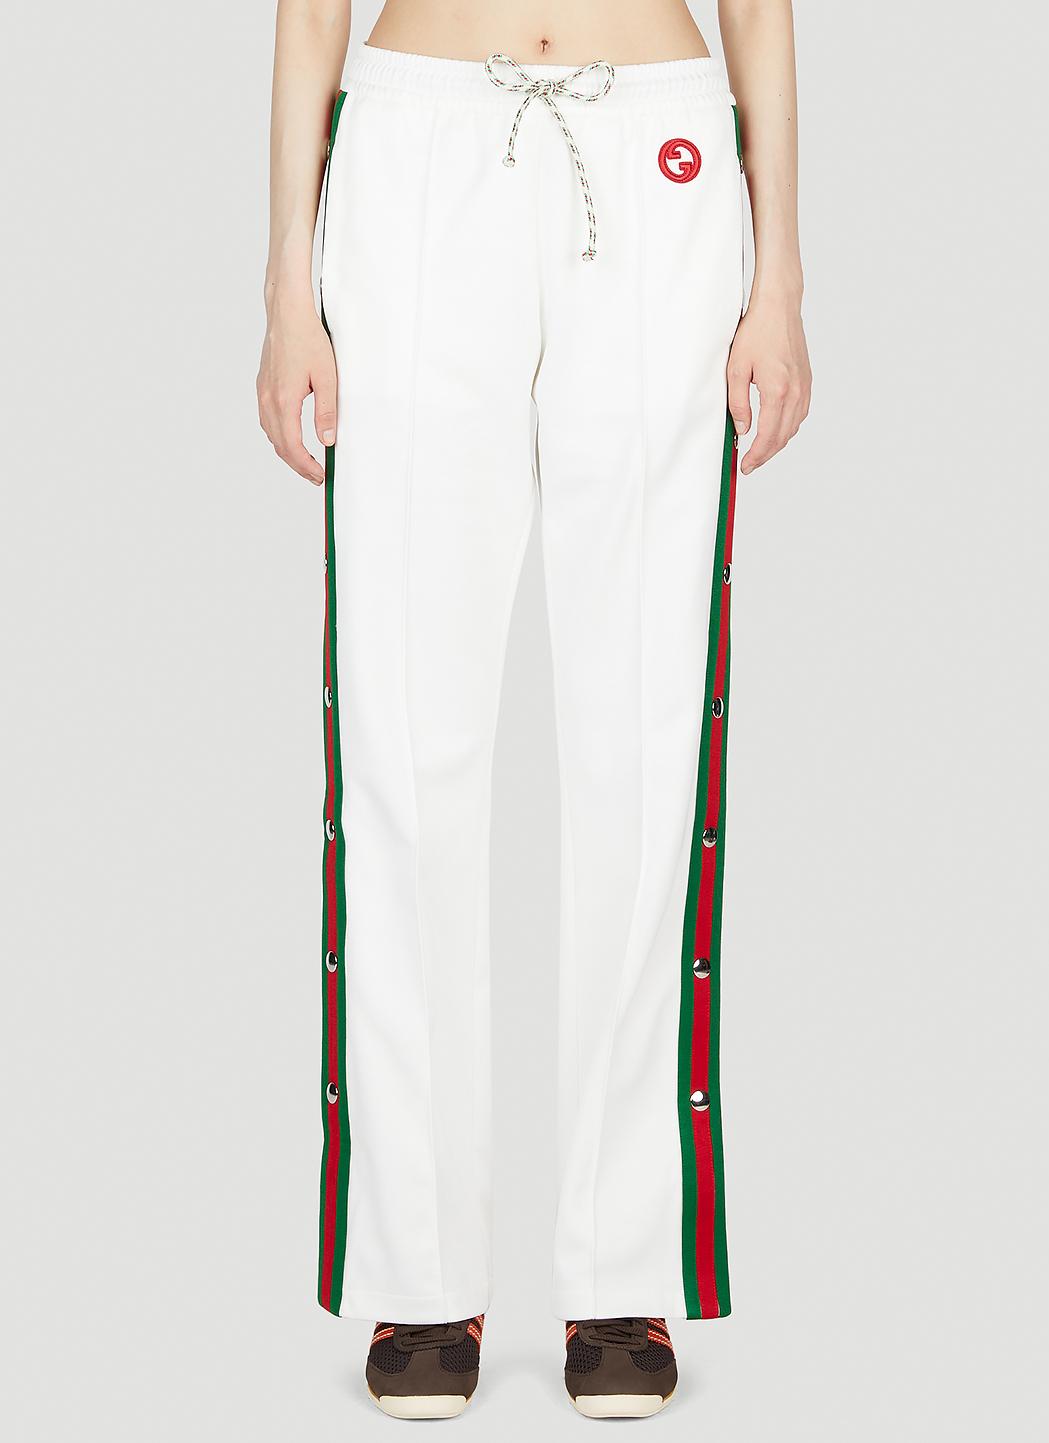 Gucci Striped Track Pants in White | Lyst